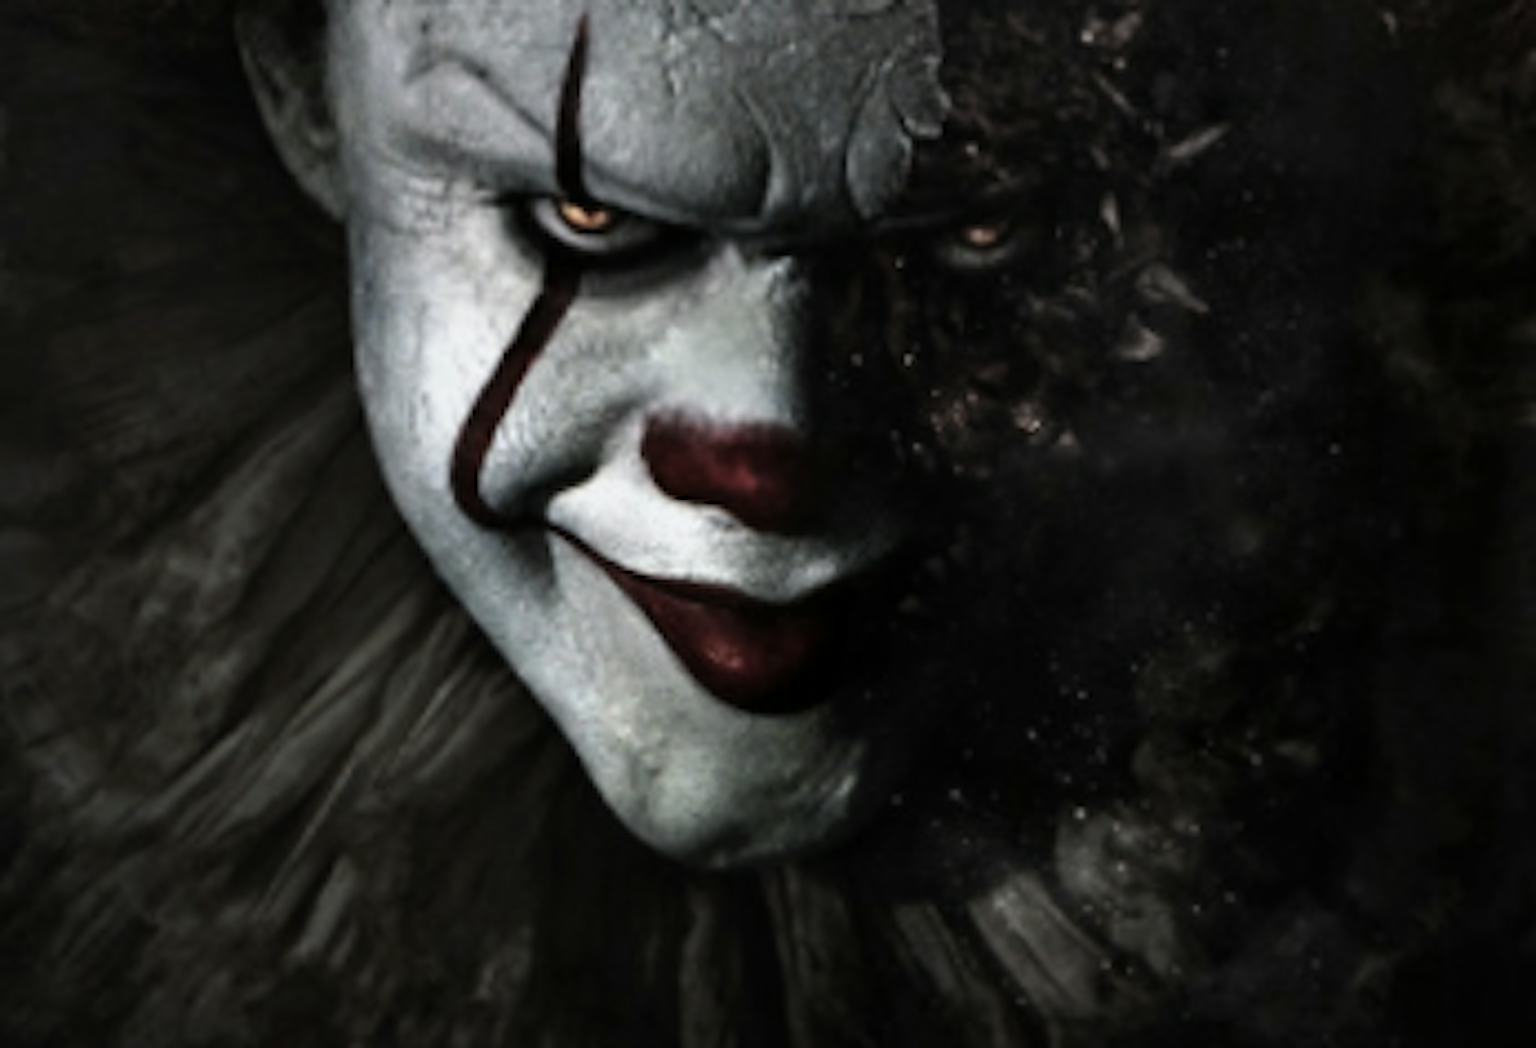 The 'It' Clown Will Be Scarier for This Psychological Reason